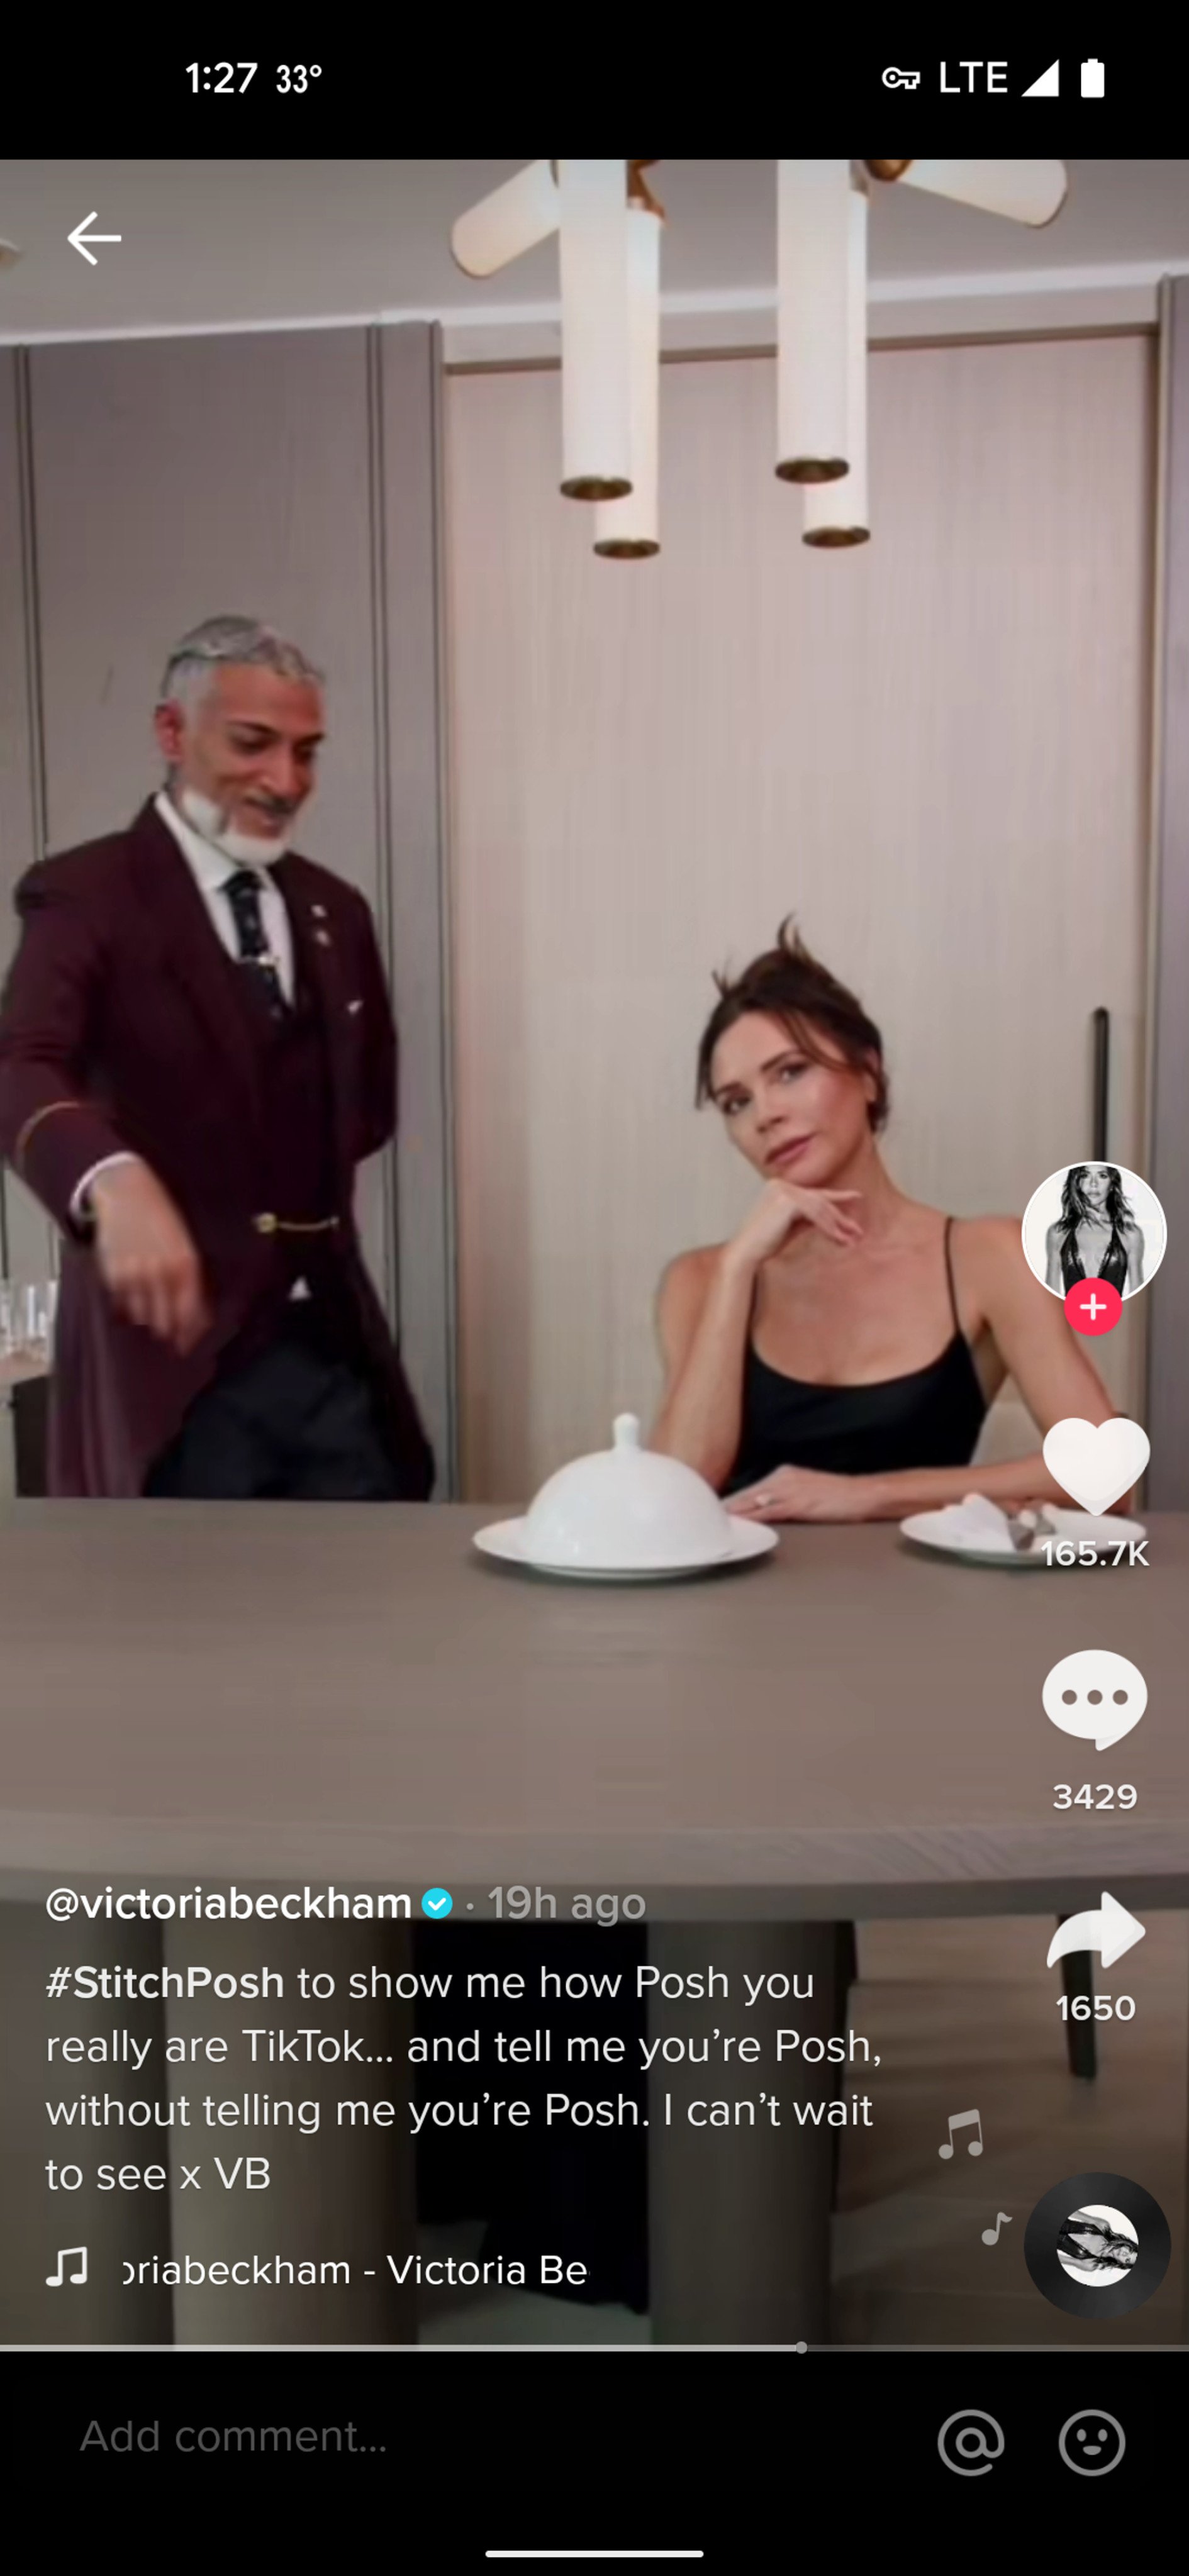 Victoria Beckham’s TikTok debut shows her joking about her famously “boring” diet of steamed fish and vegetables. Photo: TikTok